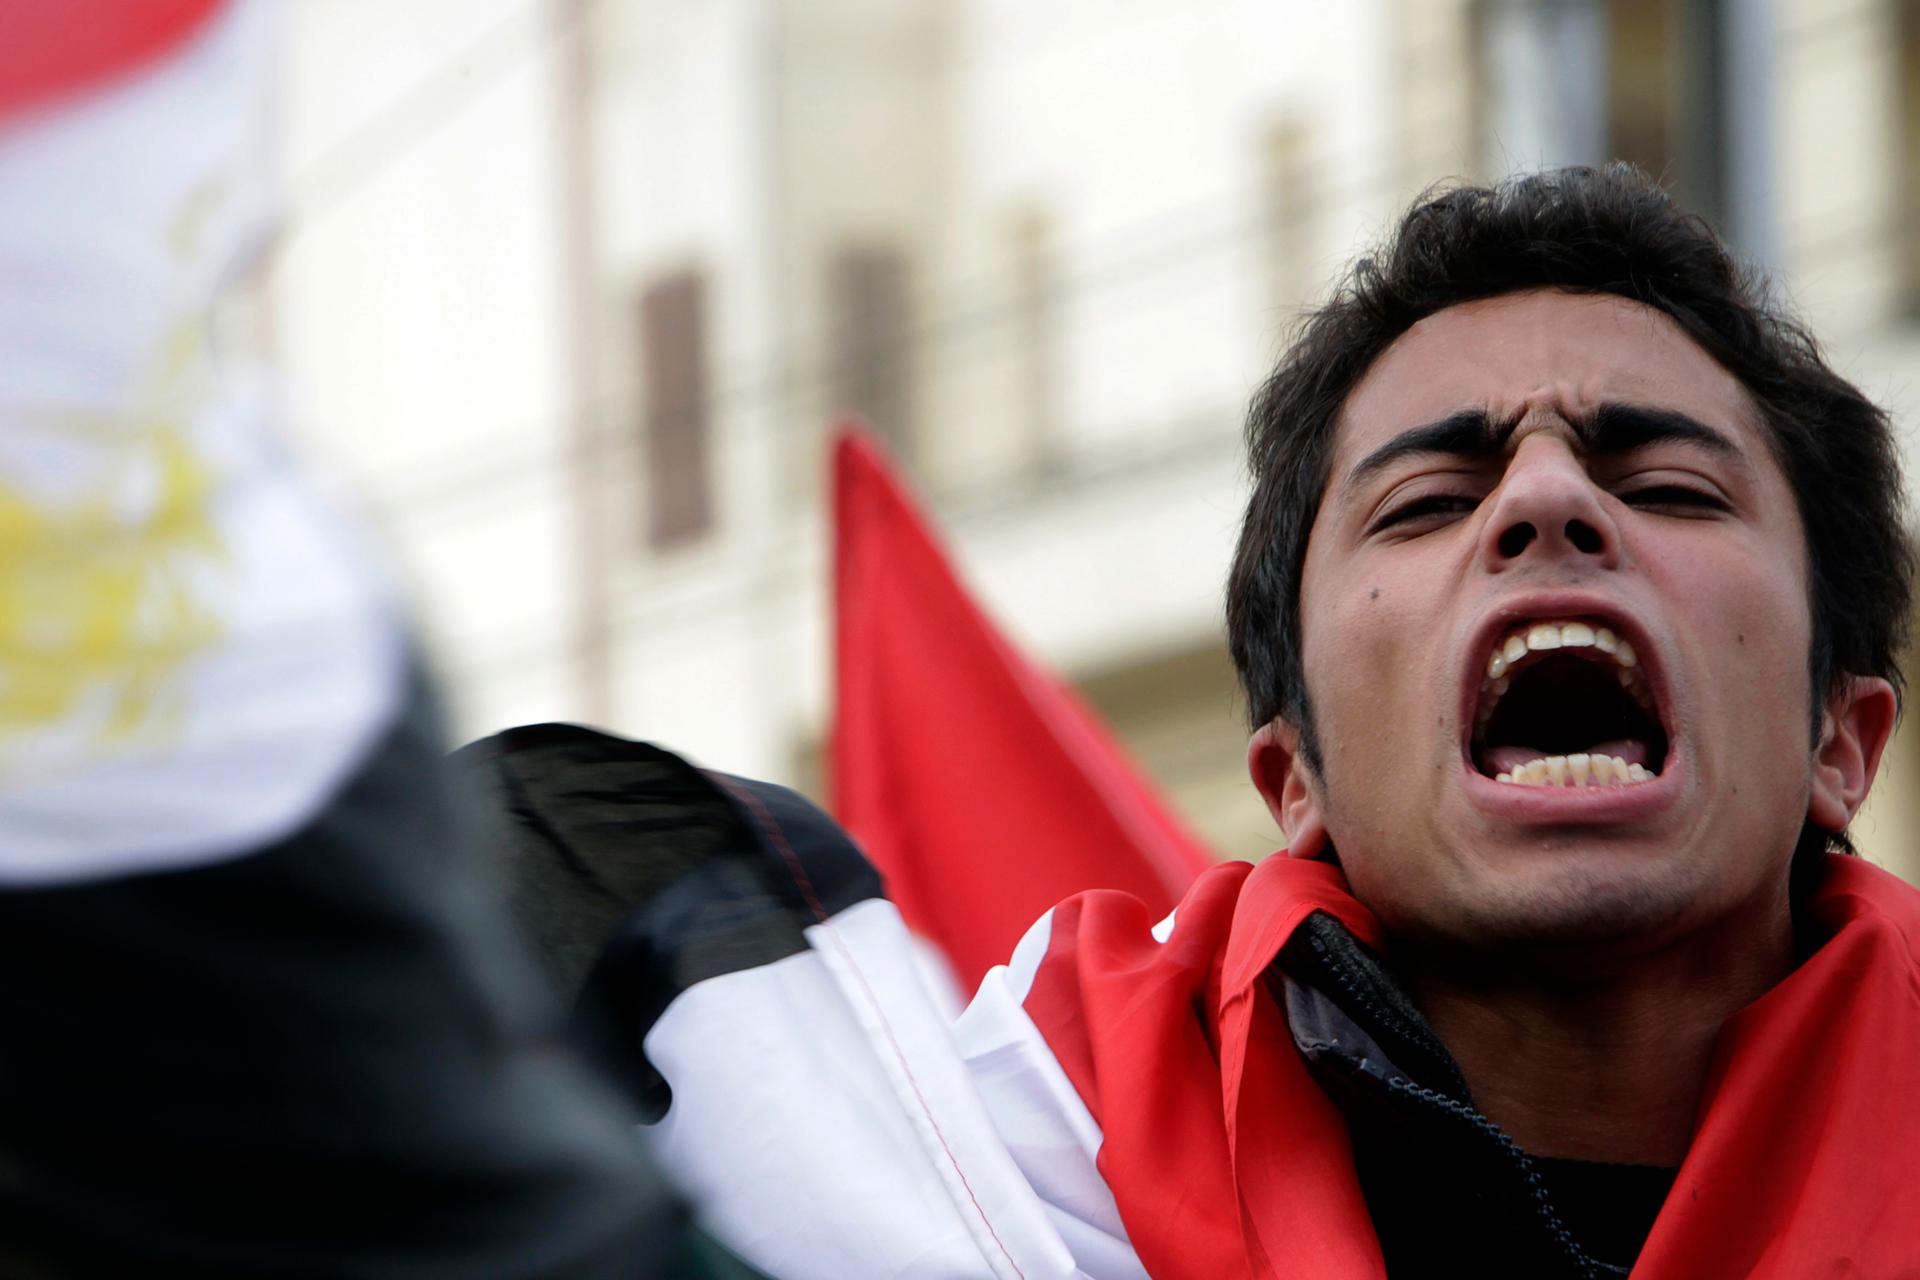 An anti-government protester participates in demonstrations against Egyptian President Hosni Mubarakin in front of the presidential palace in Cairo, Feb. 11, 2011.